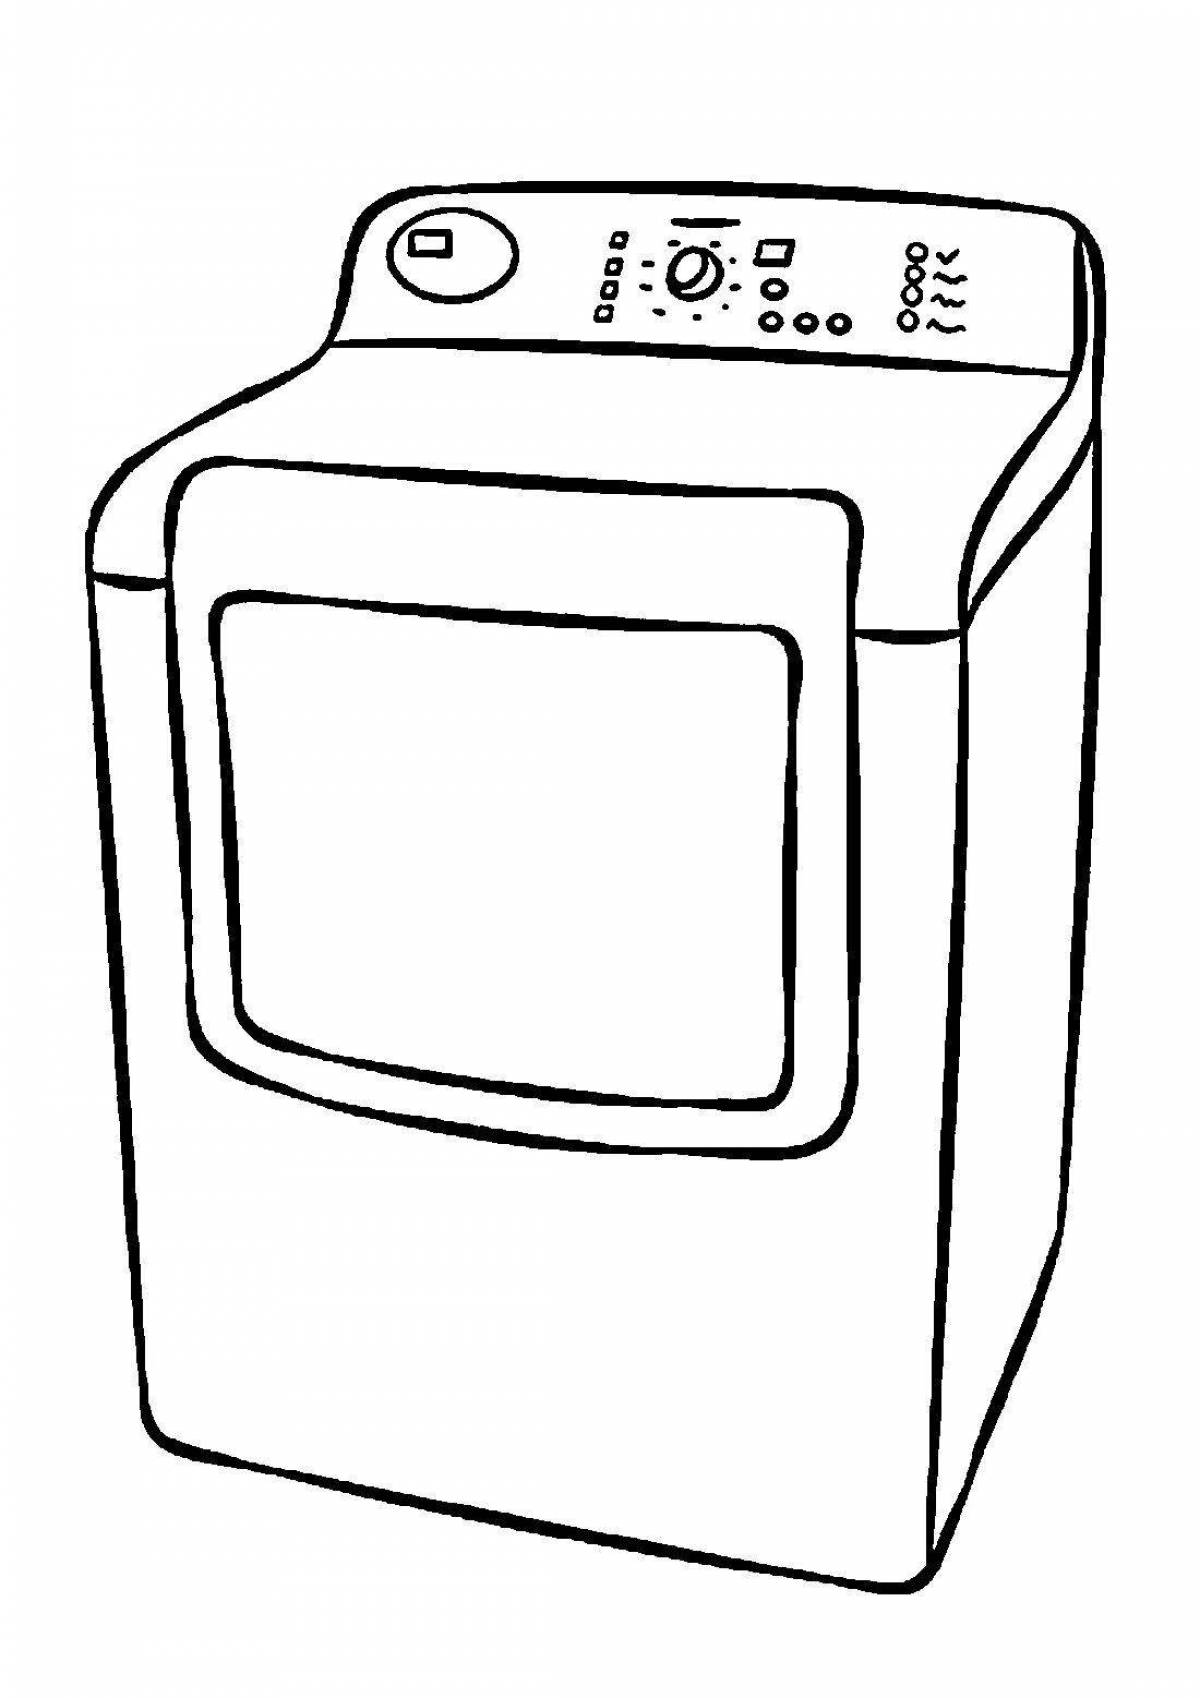 Great washing machine coloring book for toddlers